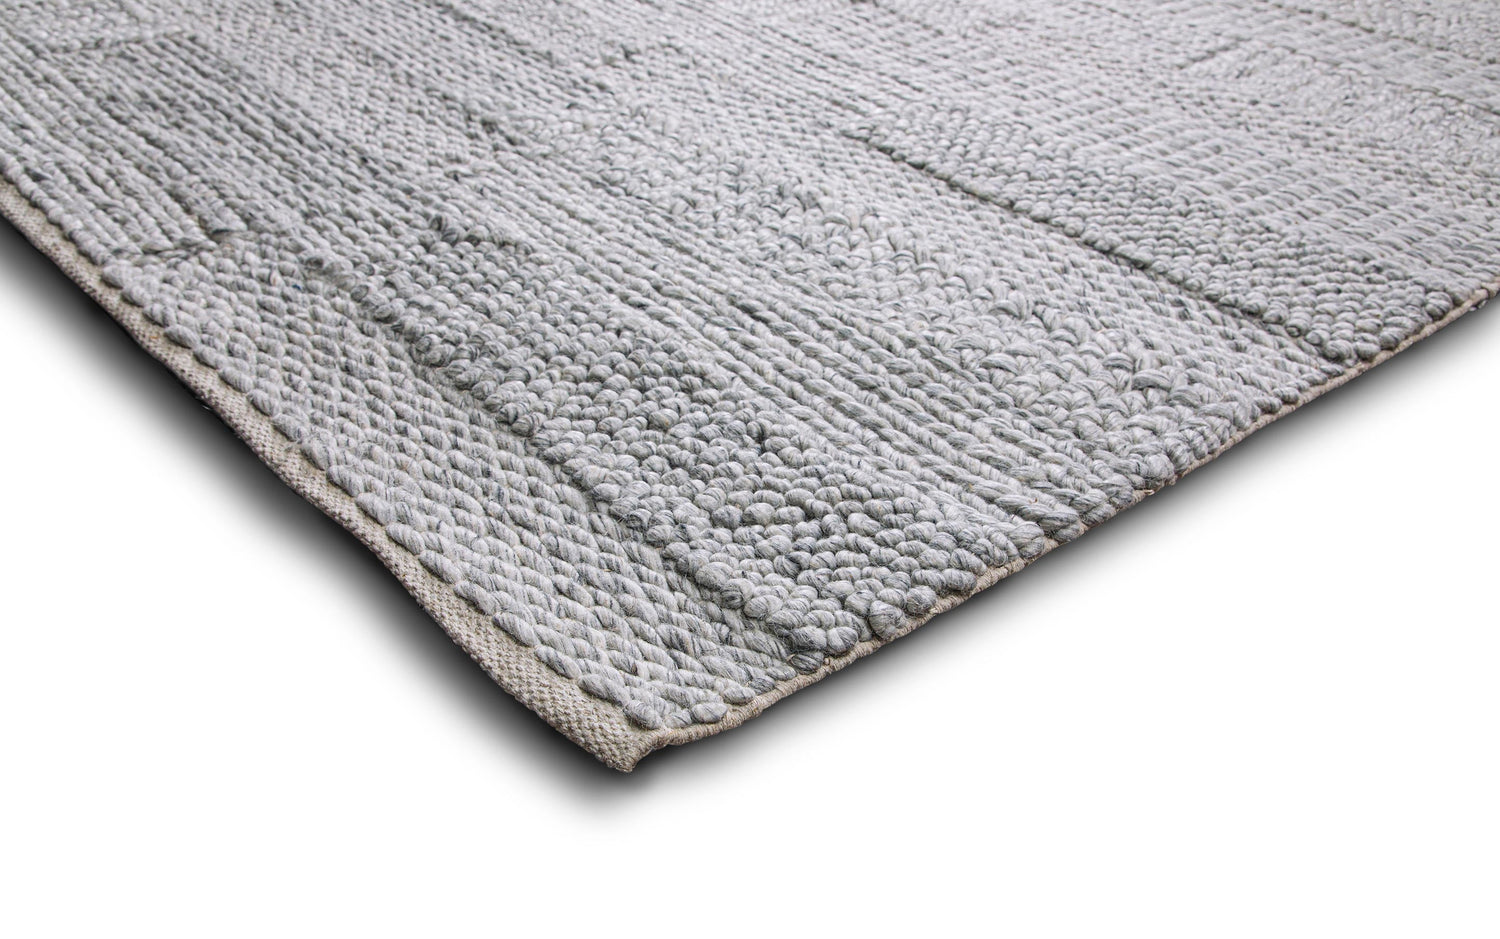 Stover 6 x 9 Area Rug